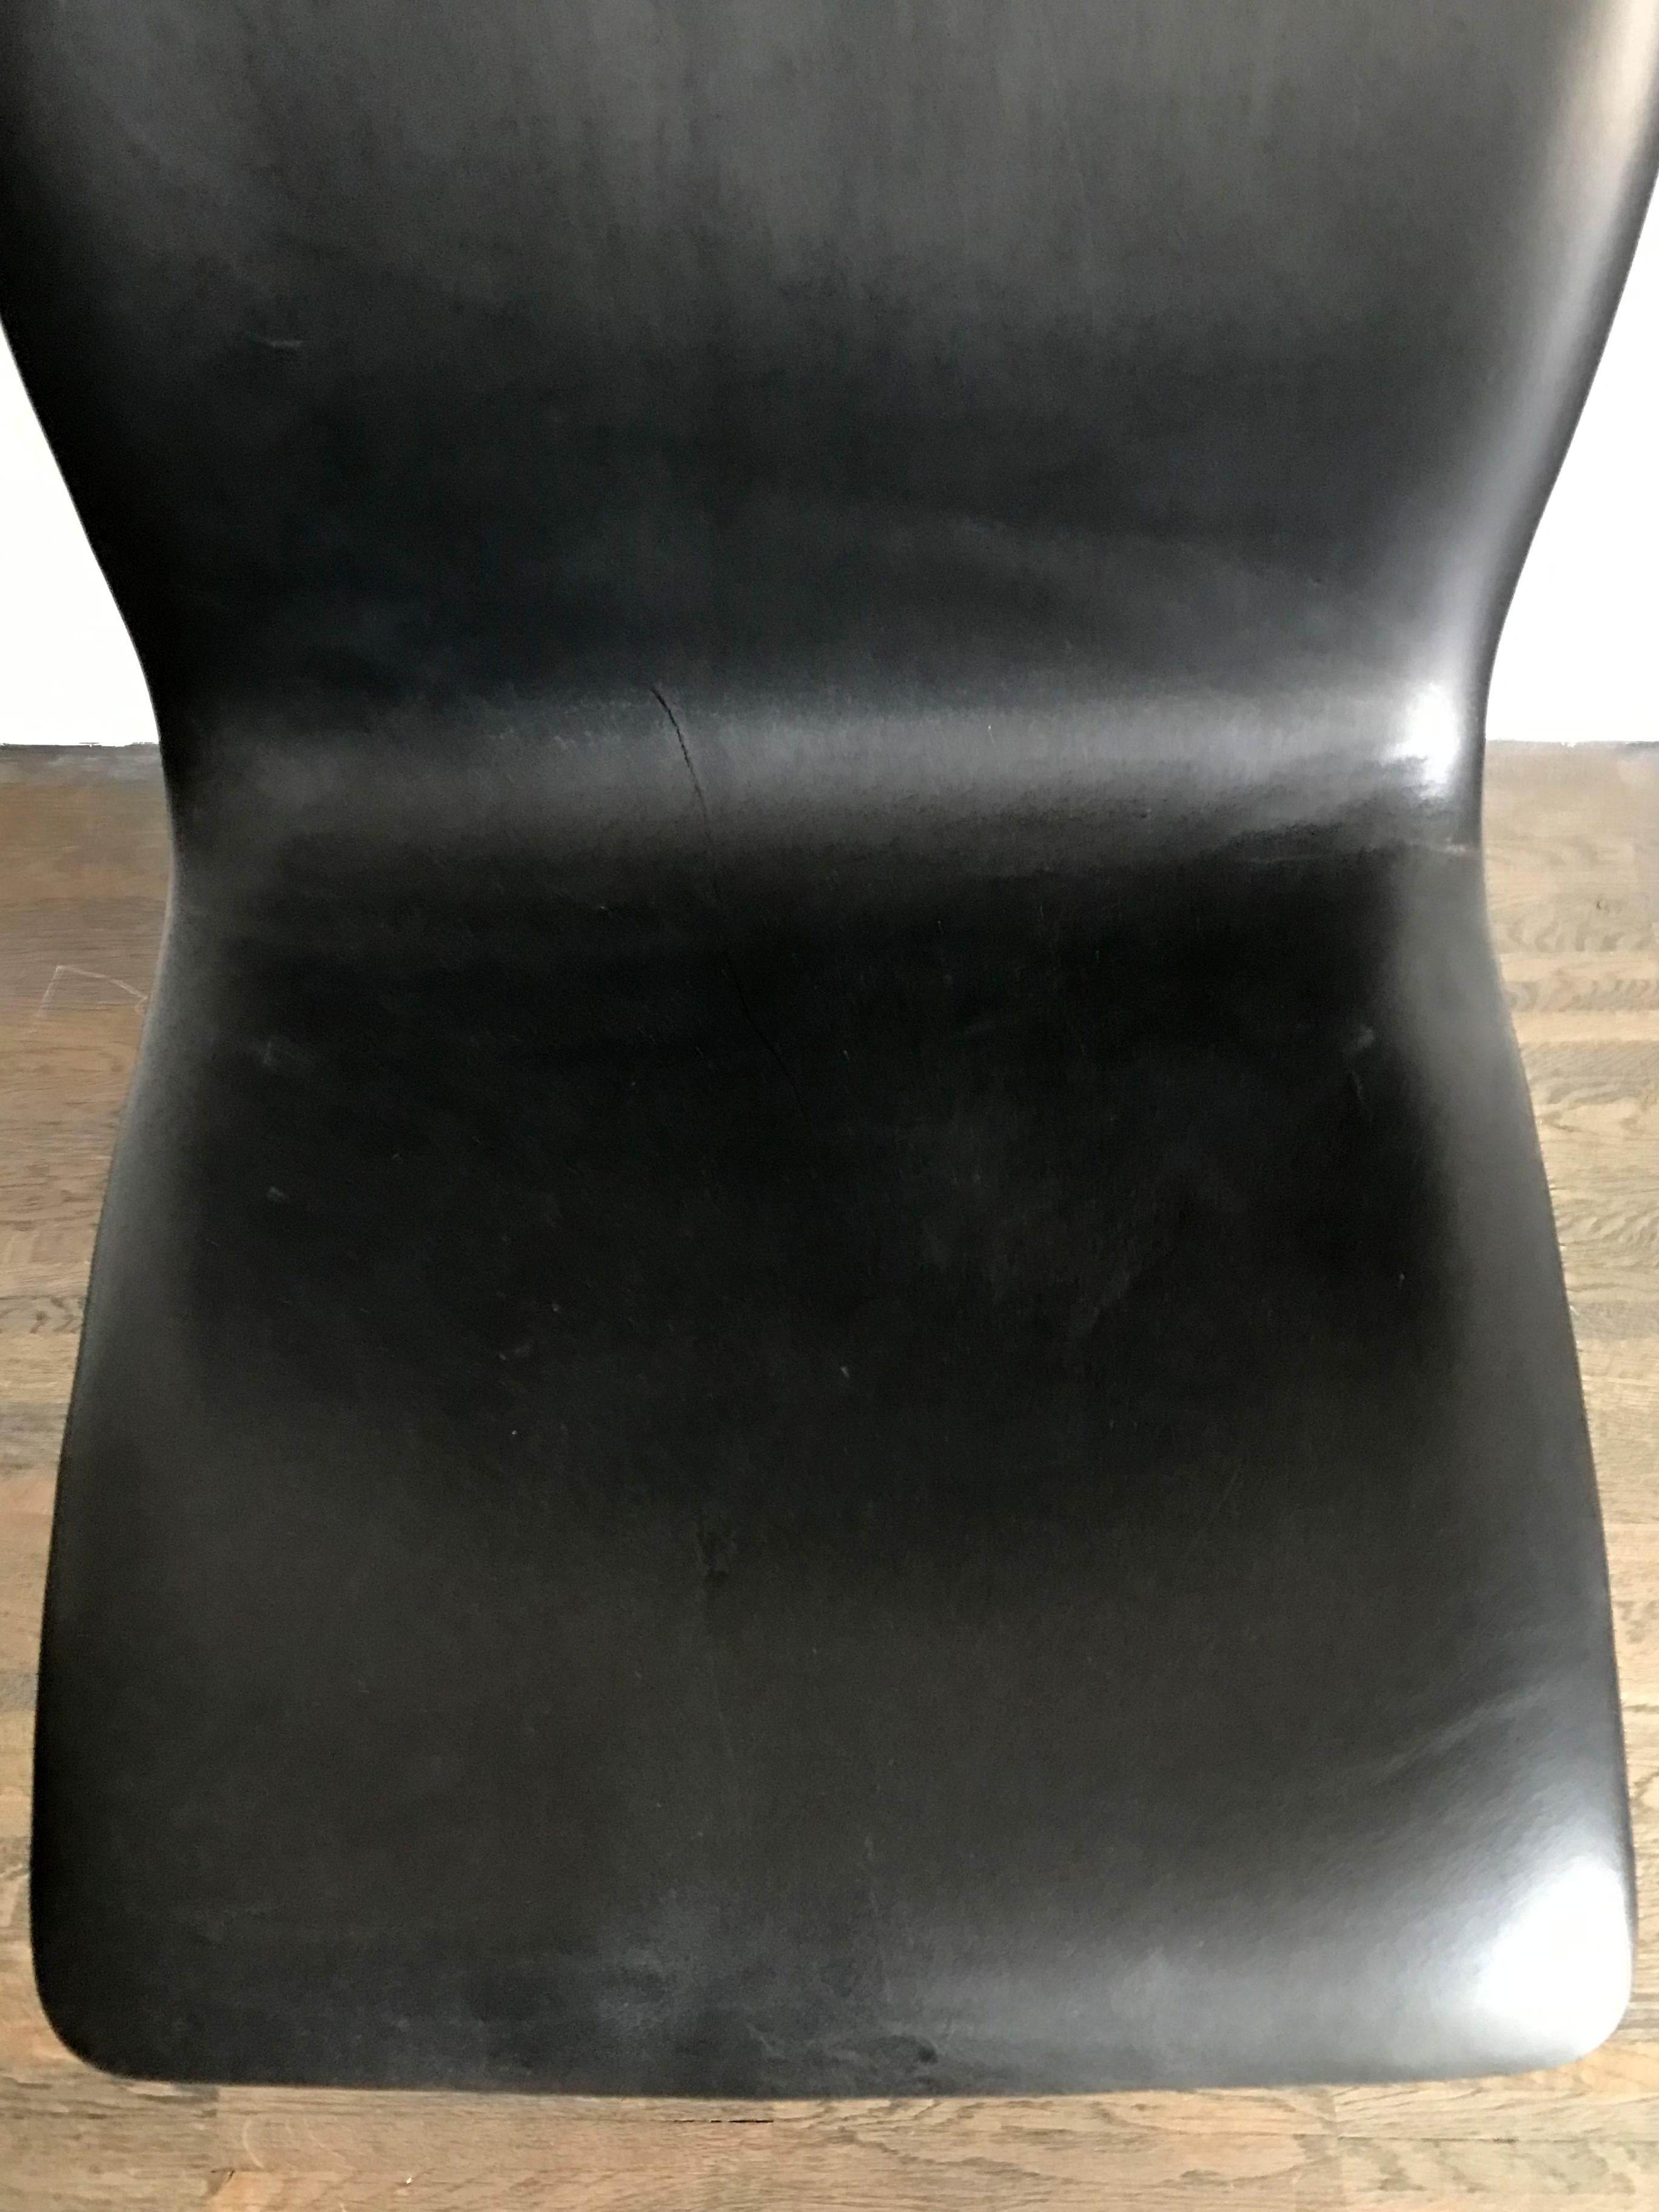 Oxford Midcentury Black Leather Chairs by Arne Jacobsen for Fritz Hansen, 1960s For Sale 5